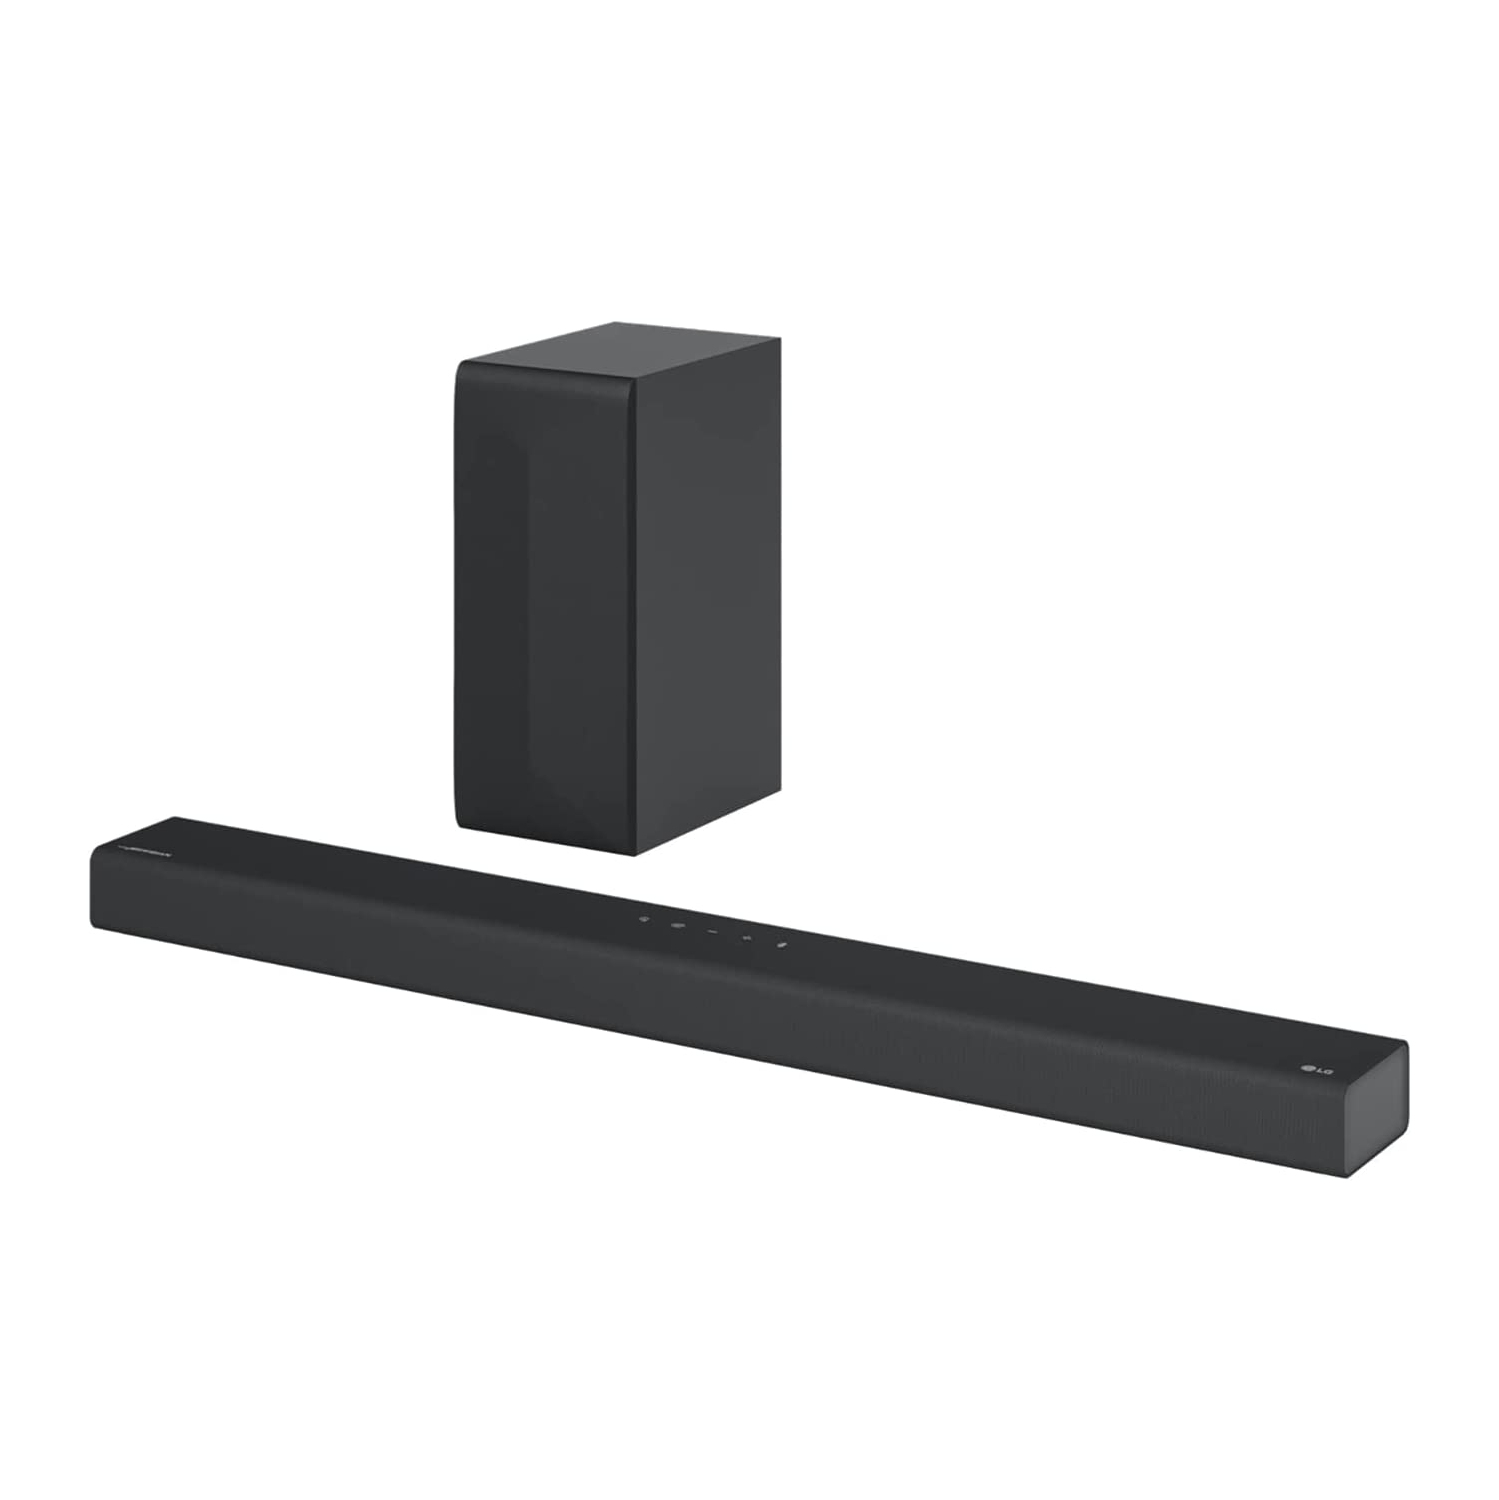 LG S65Q 3.1ch High-Res Audio Sound Bar with DTS Virtual:X, Synergy with LG TV, Meridian, HDMI, and Bluetooth connectivity , Black open box - 10/10 Condition